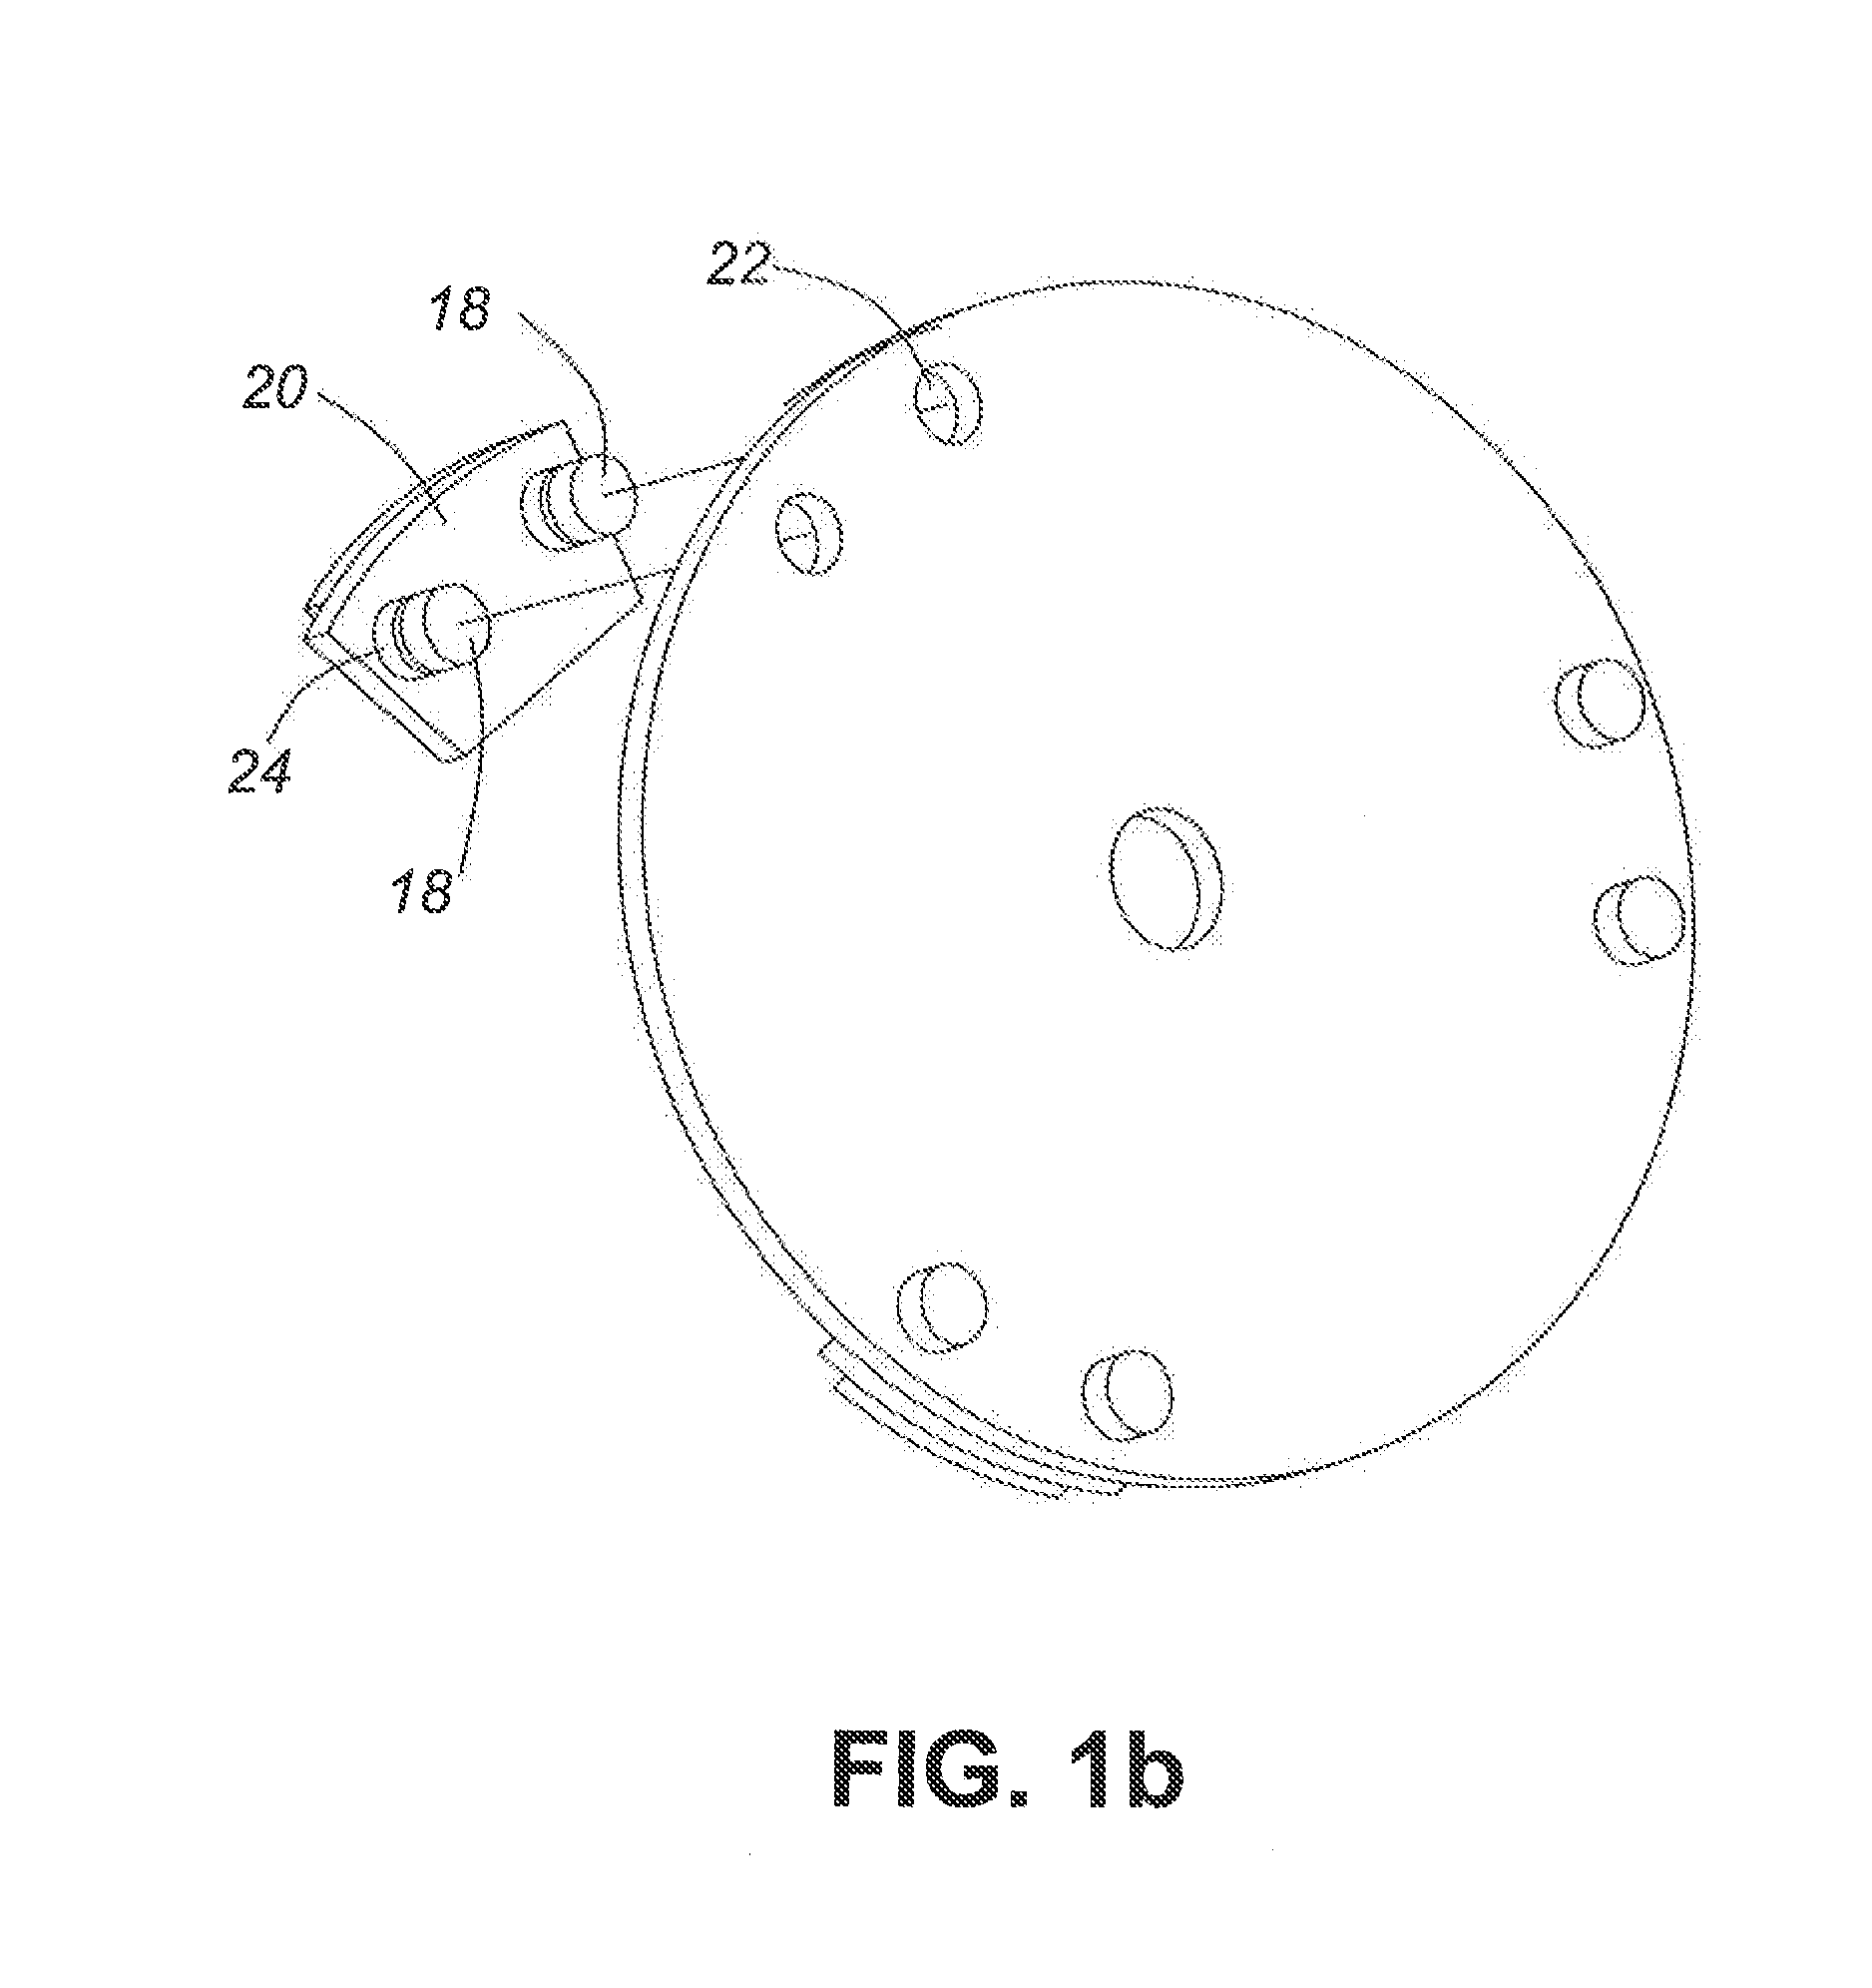 System for Mounting an Abrasive Tool to a Drive Plate of Grinding and Polishing Machines